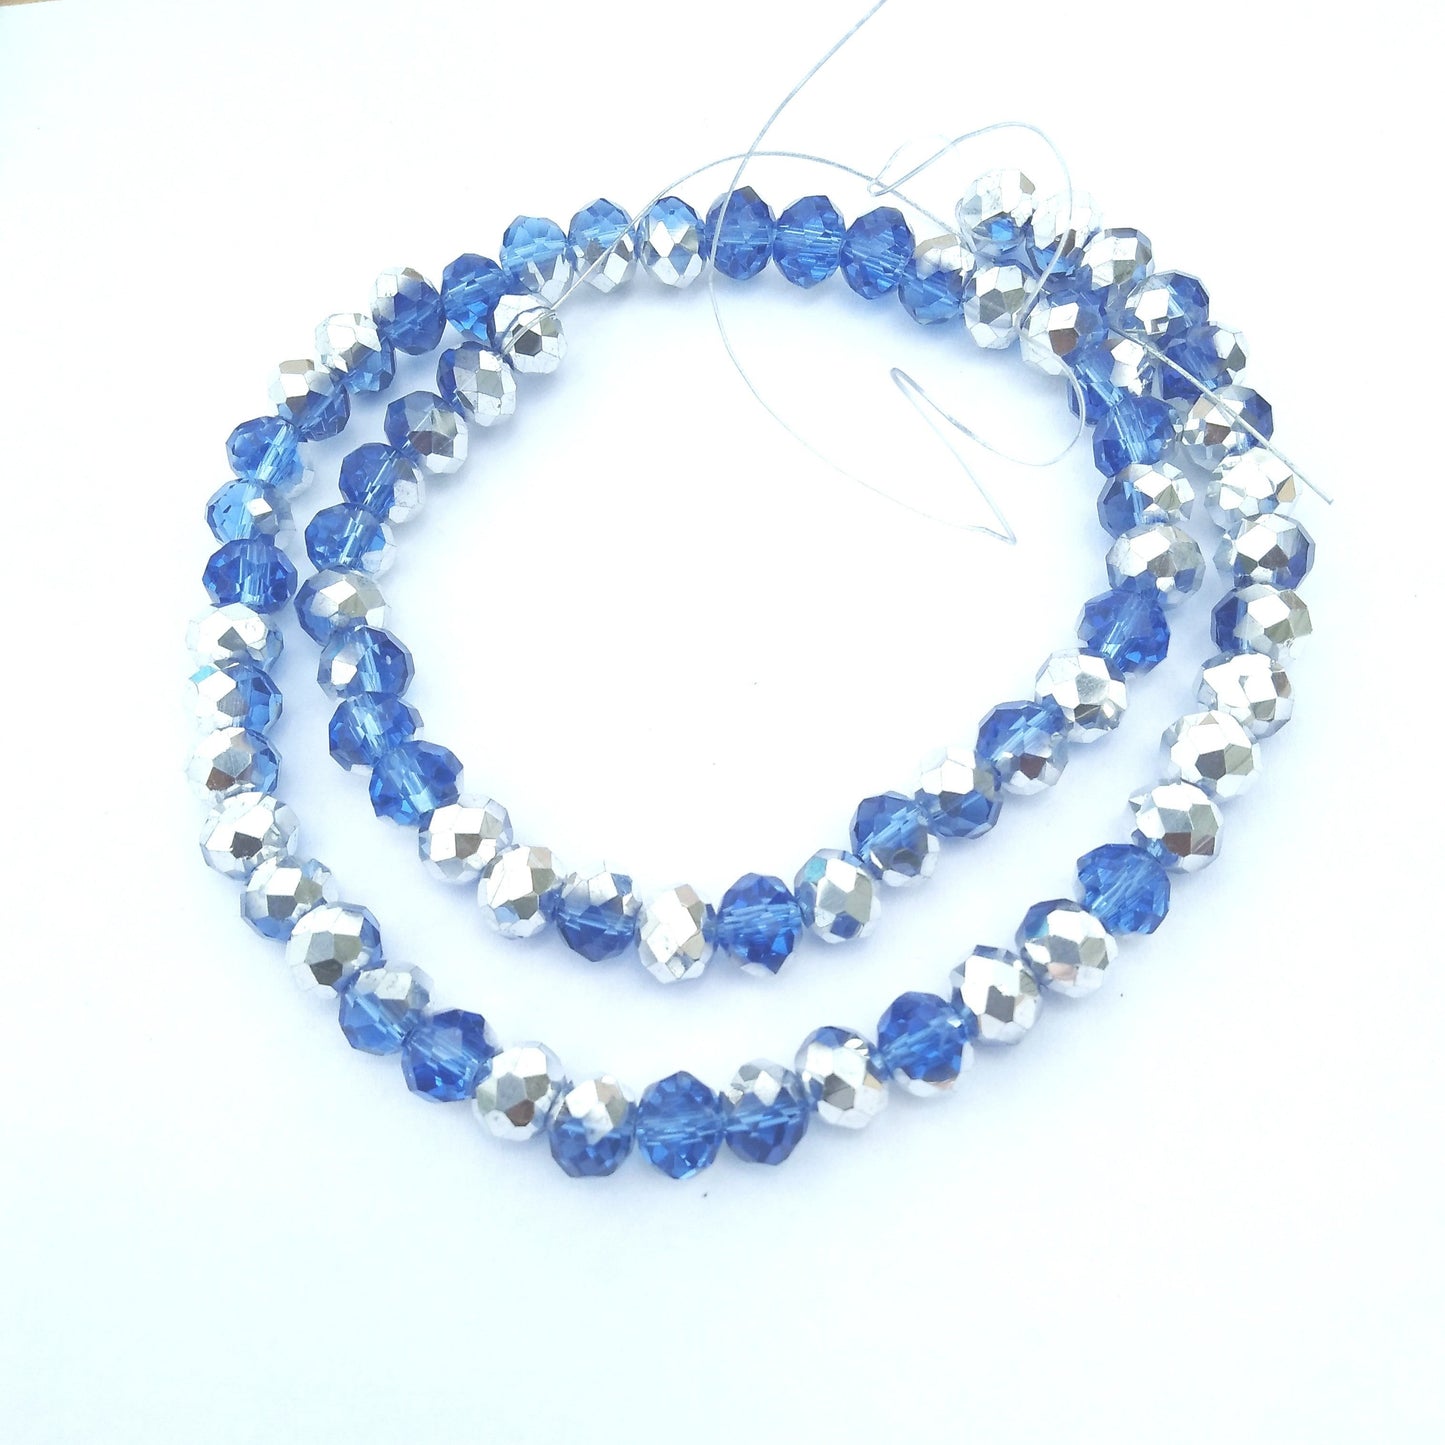 Chinese Crystal Beads Rondelle Shape, Color Sapphire and Silver 68 Beads